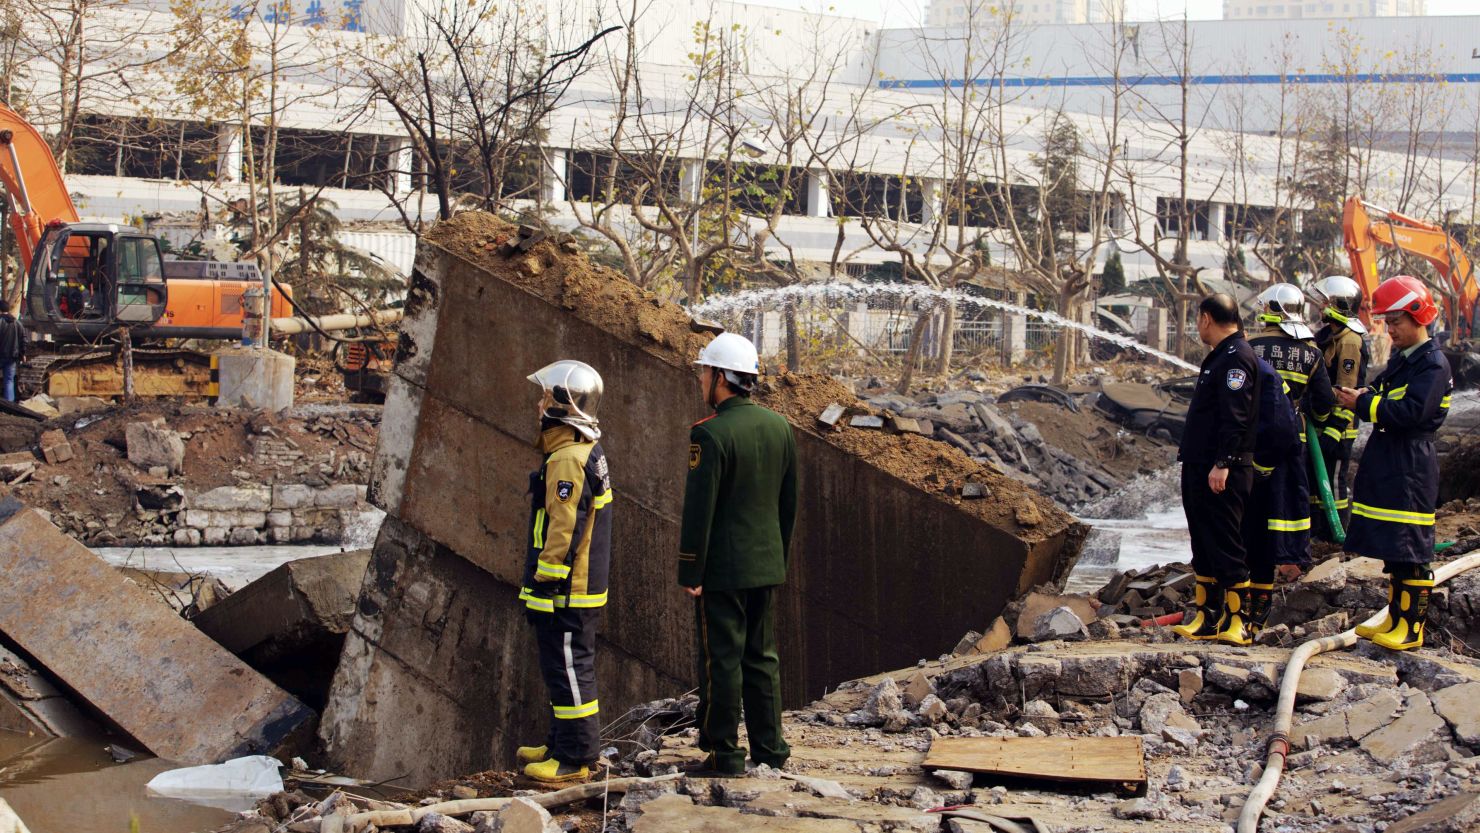 Chinese rescuers search for victims after an oil pipeline exploded in Qingdao on November 22.